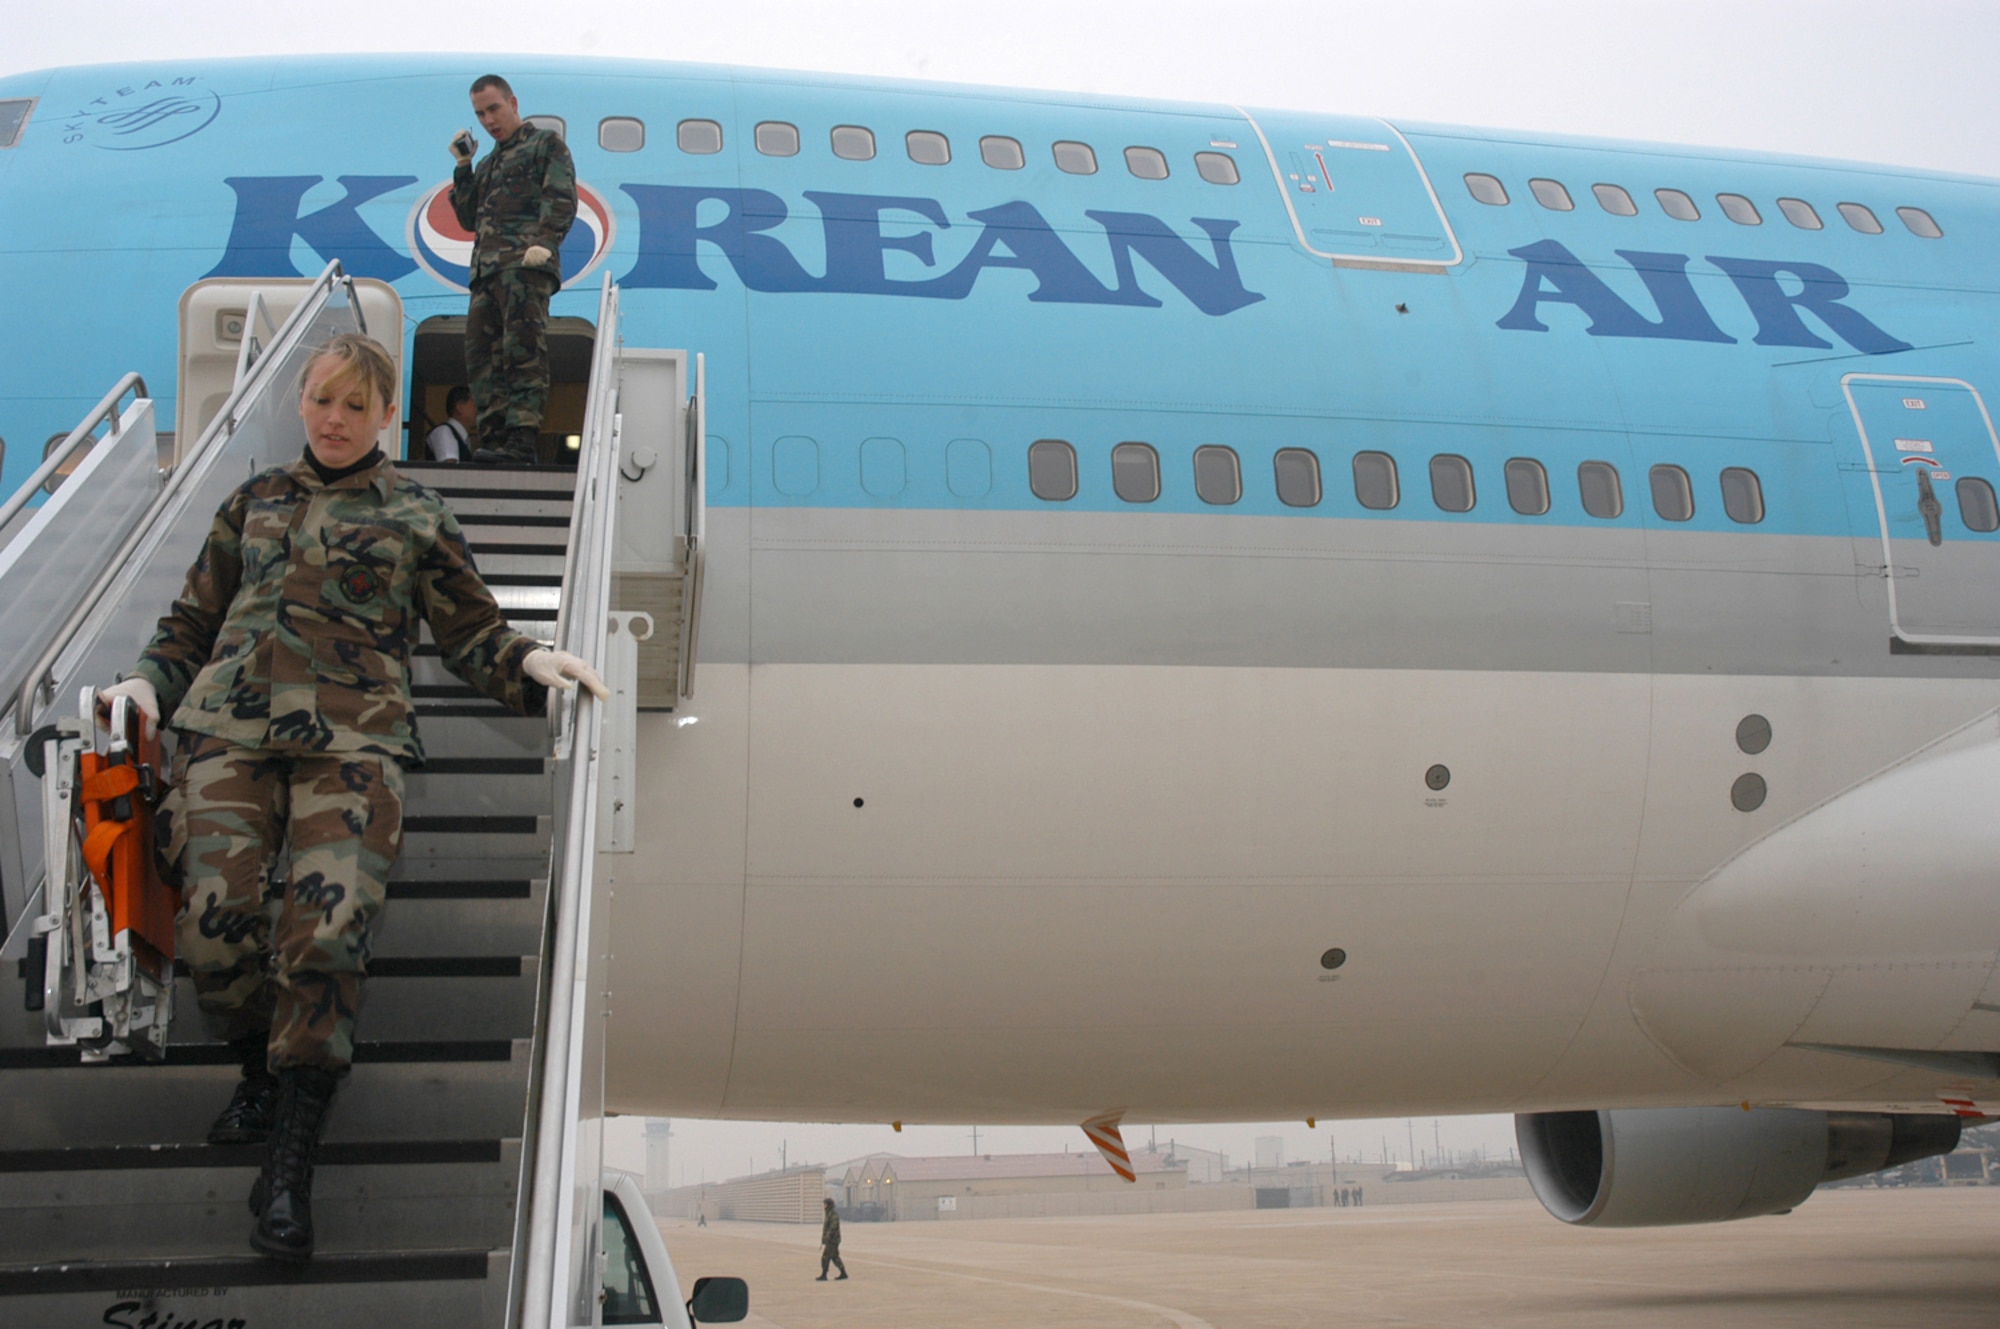 Senior Airman Tonya Jones prepares to receive a 65-year old Korean man needing medical attention at Kunsan Air Base, South Korea. The man was transported to an ambulance after his Korean Airline flight was diverted to Kunsan from Incheon International Airport. The passenger airliner, with 274 people on board, diverted to Kunsan due to poor weather conditions at Incheon. The man was transported to Kunsan Medical Center in downtown Kunsan City. Airman Jones is a medical technician assigned to the 8th Medical Group. (U.S. Air Force photo/Staff Sgt. Nathan Gallahan)